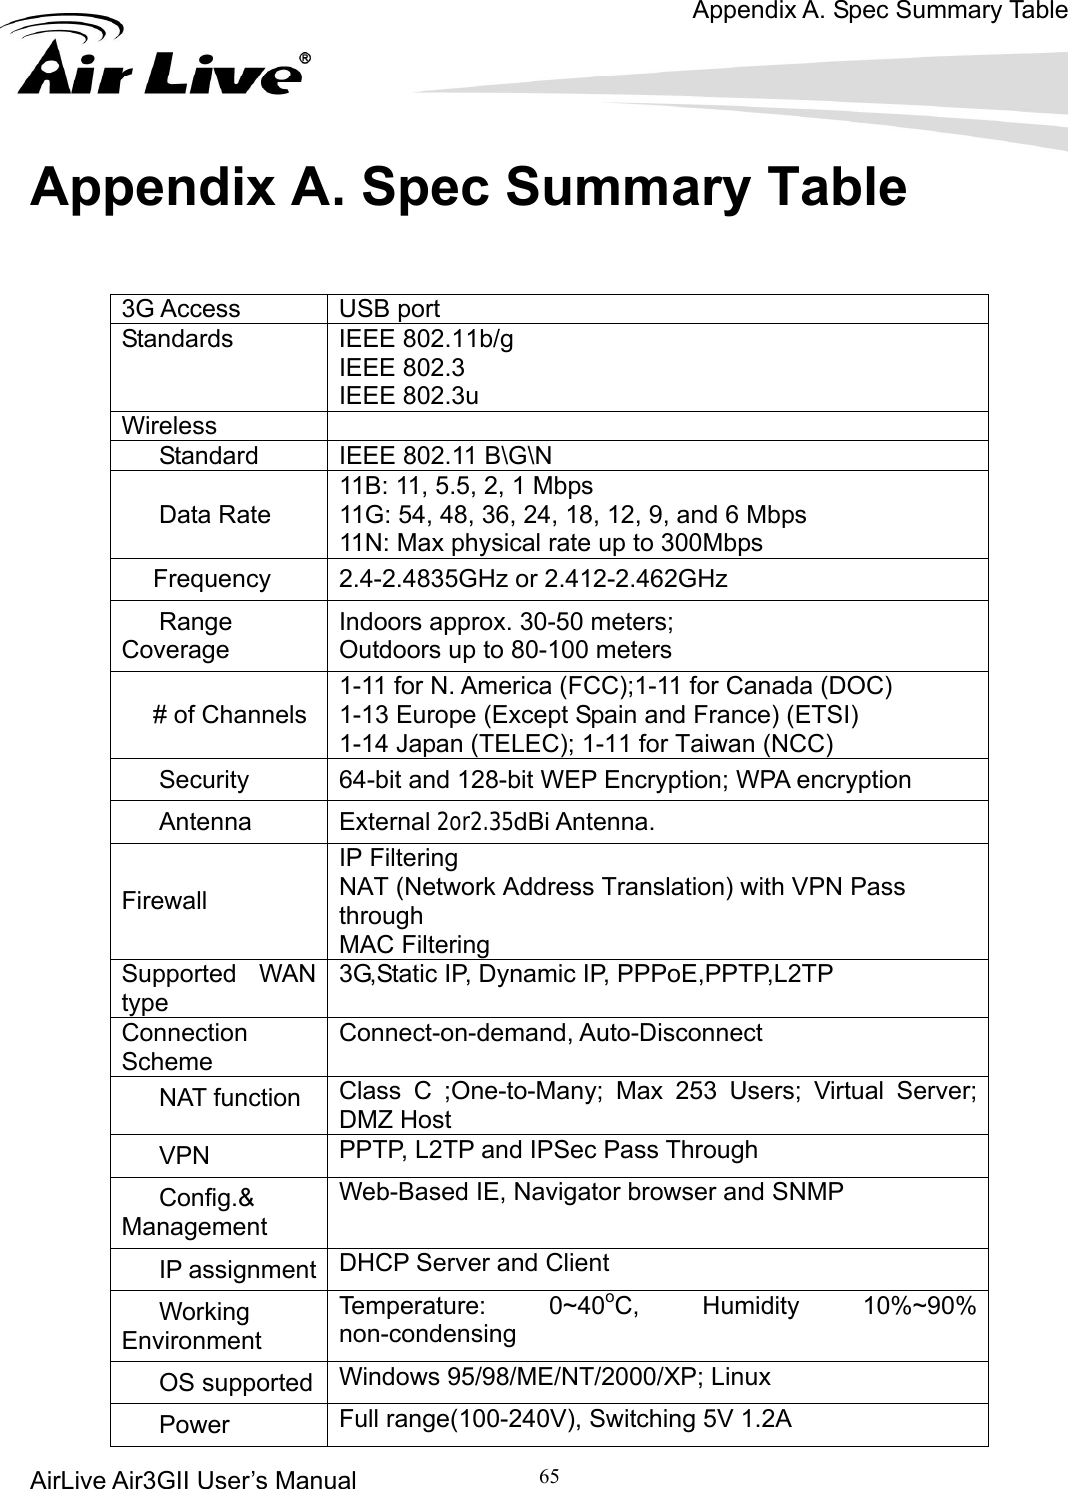 Appendix A. Spec Summary Table AirLive Air3GII User’s Manual 65      Appendix A. Spec Summary Table    3G Access  USB port Standards IEEE 802.11b/g IEEE 802.3 E 802.3u IEEWireless     Standard  IEEE 802.11 B\G\N Data Rate  11G: 54, 48, 36, 24, 18, 12, 9, and 611N: Max physical rate up to 300Mb11B: 11, 5.5, 2, 1 Mbps  Mbps ps Frequency  2.4-2.4835GHz or 2.412-2.462GHz Range Coverage Indoors approx. 30-50 meters;   Outdoors up to 80-100 meters # of Channels 1-11 for N. America (FCC);1-11 for Canada (DOC) 1-13 Europe (Except Spain and France) (ETSI) 1-14 Japan (TELEC); 1-11 for Taiwan (NCC)Security  64-bit and 128-bit WEP Encryption; WPA encryption Antenna External 2or2.35dBi Antenna. Firewall IP Filtering NAT (Network Address Translation) with VPN Pass through MAC Filtering Supported WAN type 3G,Static IP, Dynamic IP, PPPoE,PPTP,L2TP Connection Scheme Connect-on-demand, Auto-Disconnect   NAT function  Class C ;One-to-Many; Max 253 Users; Virtual Server; DMZ Host VPN  PPTP, L2TP and IPSec Pass Through Config.&amp; Management Web-Based IE, Navigator browser and SNMP IP assignment  DHCP Server and Client Working Environment Temperature: 0~40oC, Humidity 10%~90% non-condensing OS supported  Windows 95/98/ME/NT/2000/XP; Linux Power  Full range(100-240V), Switching 5V 1.2A 